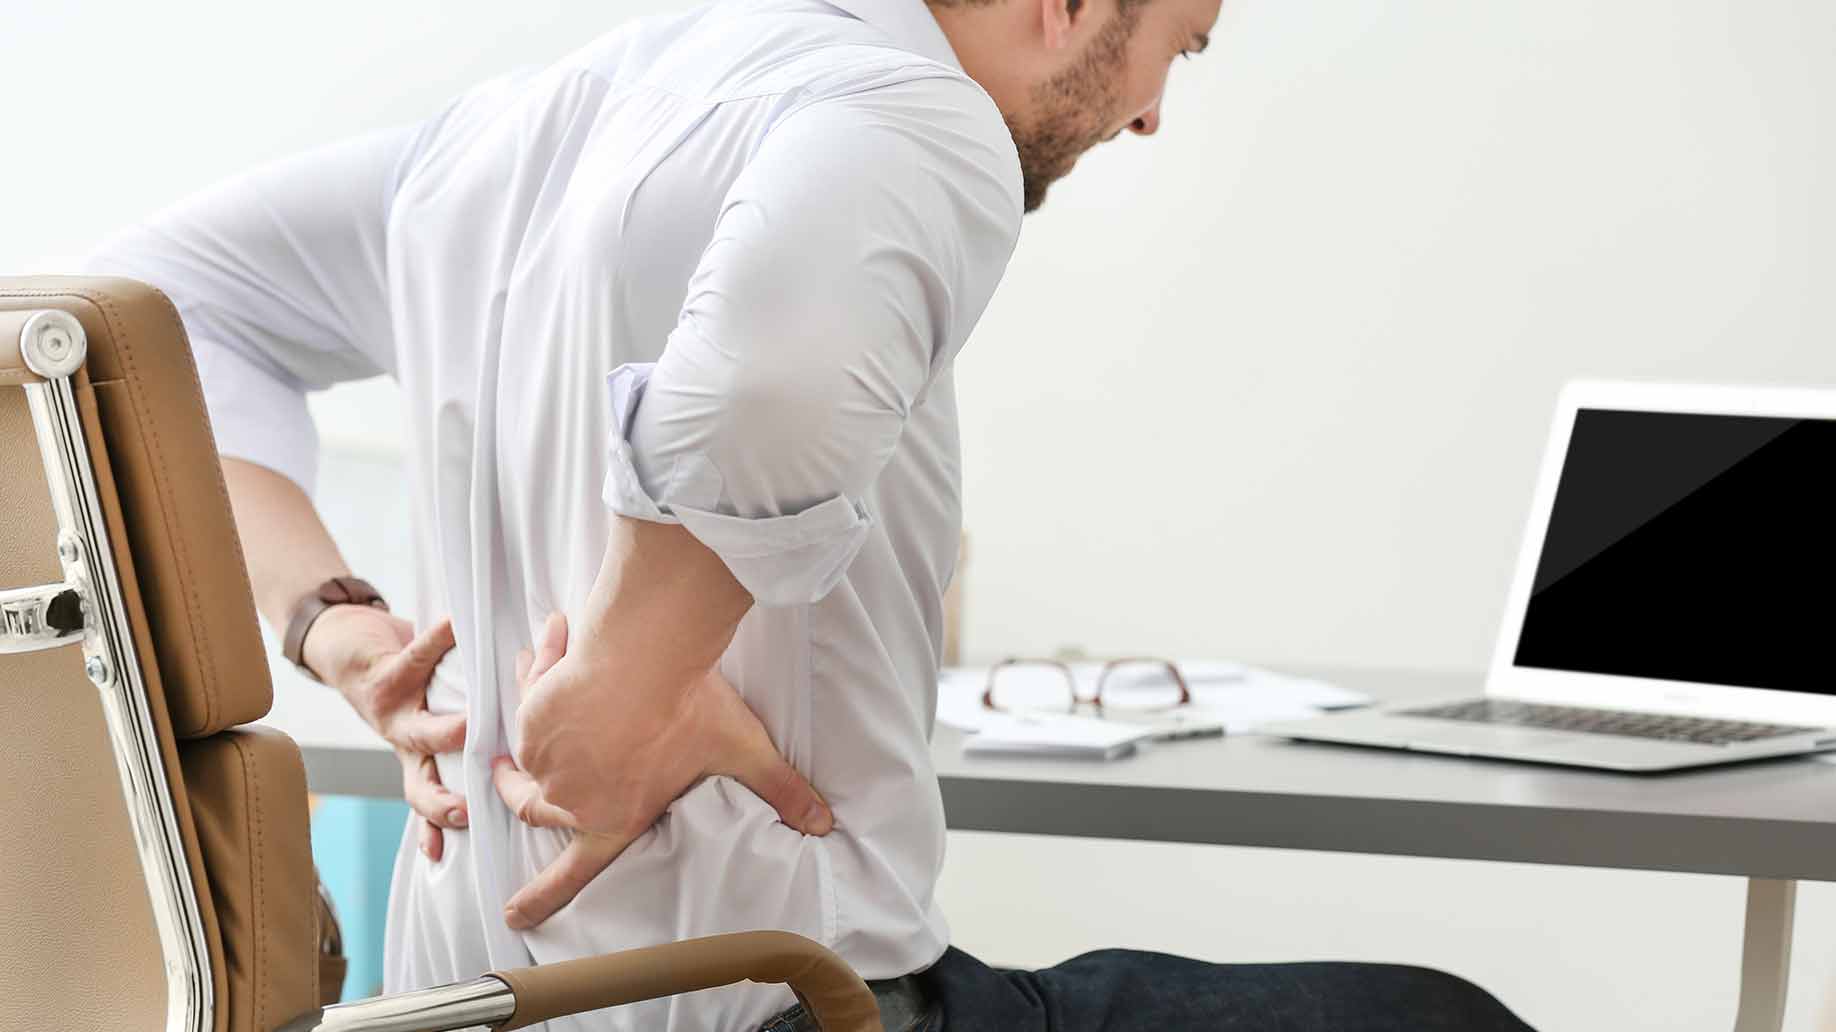 Lower Back Pain Management for Office Workers - YEG Fitness